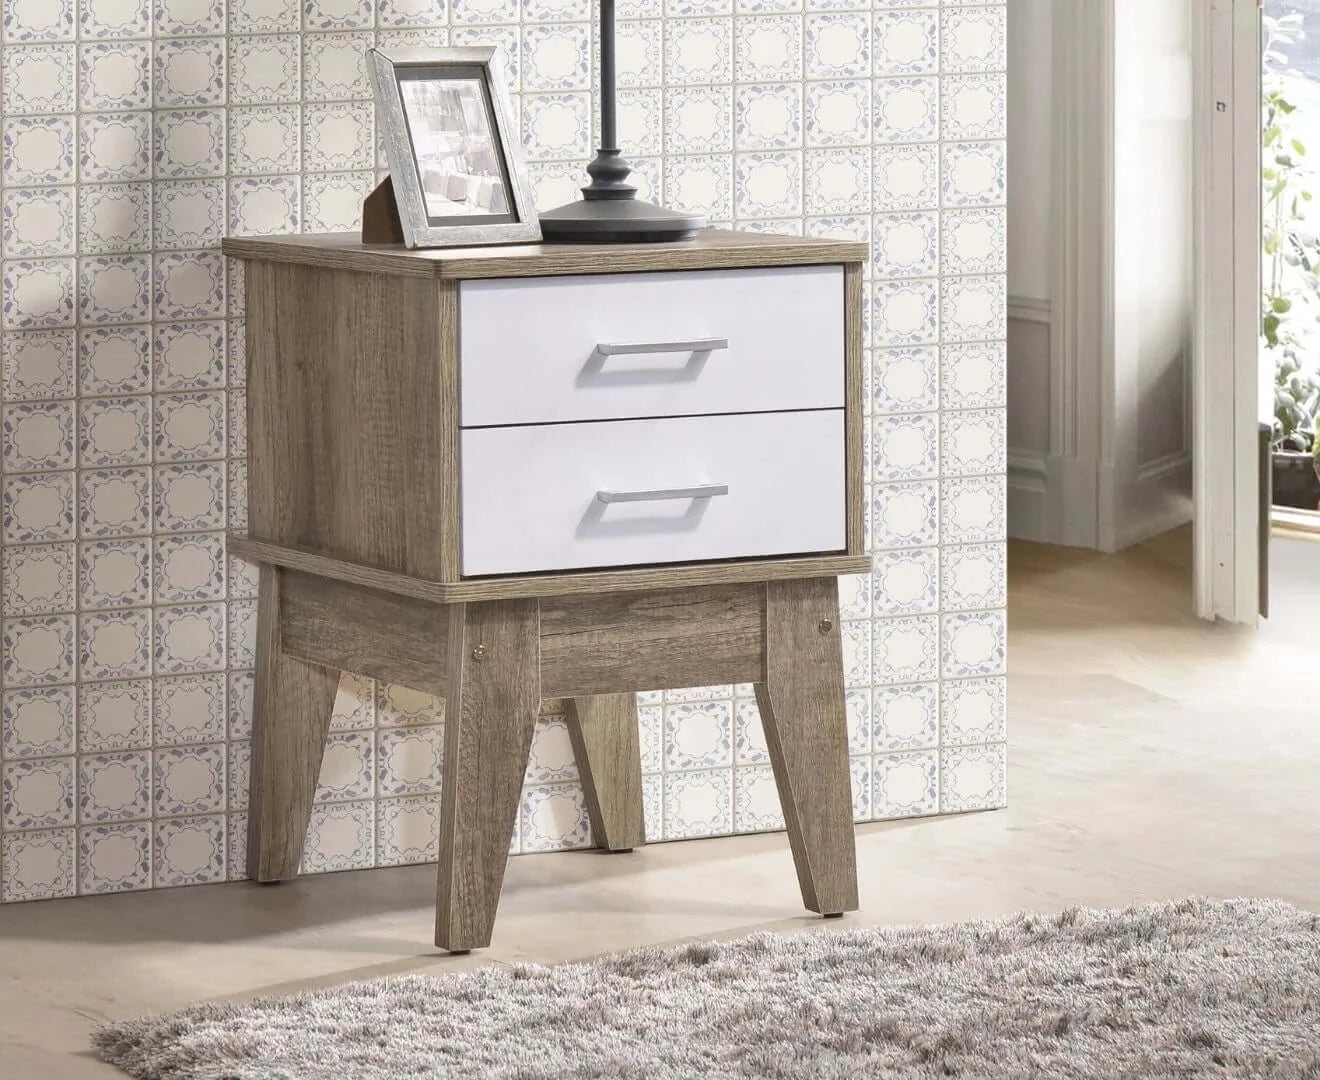 Buy wooden 2 drawers bedside table in light oak finish with white accent - upinteriors-Upinteriors